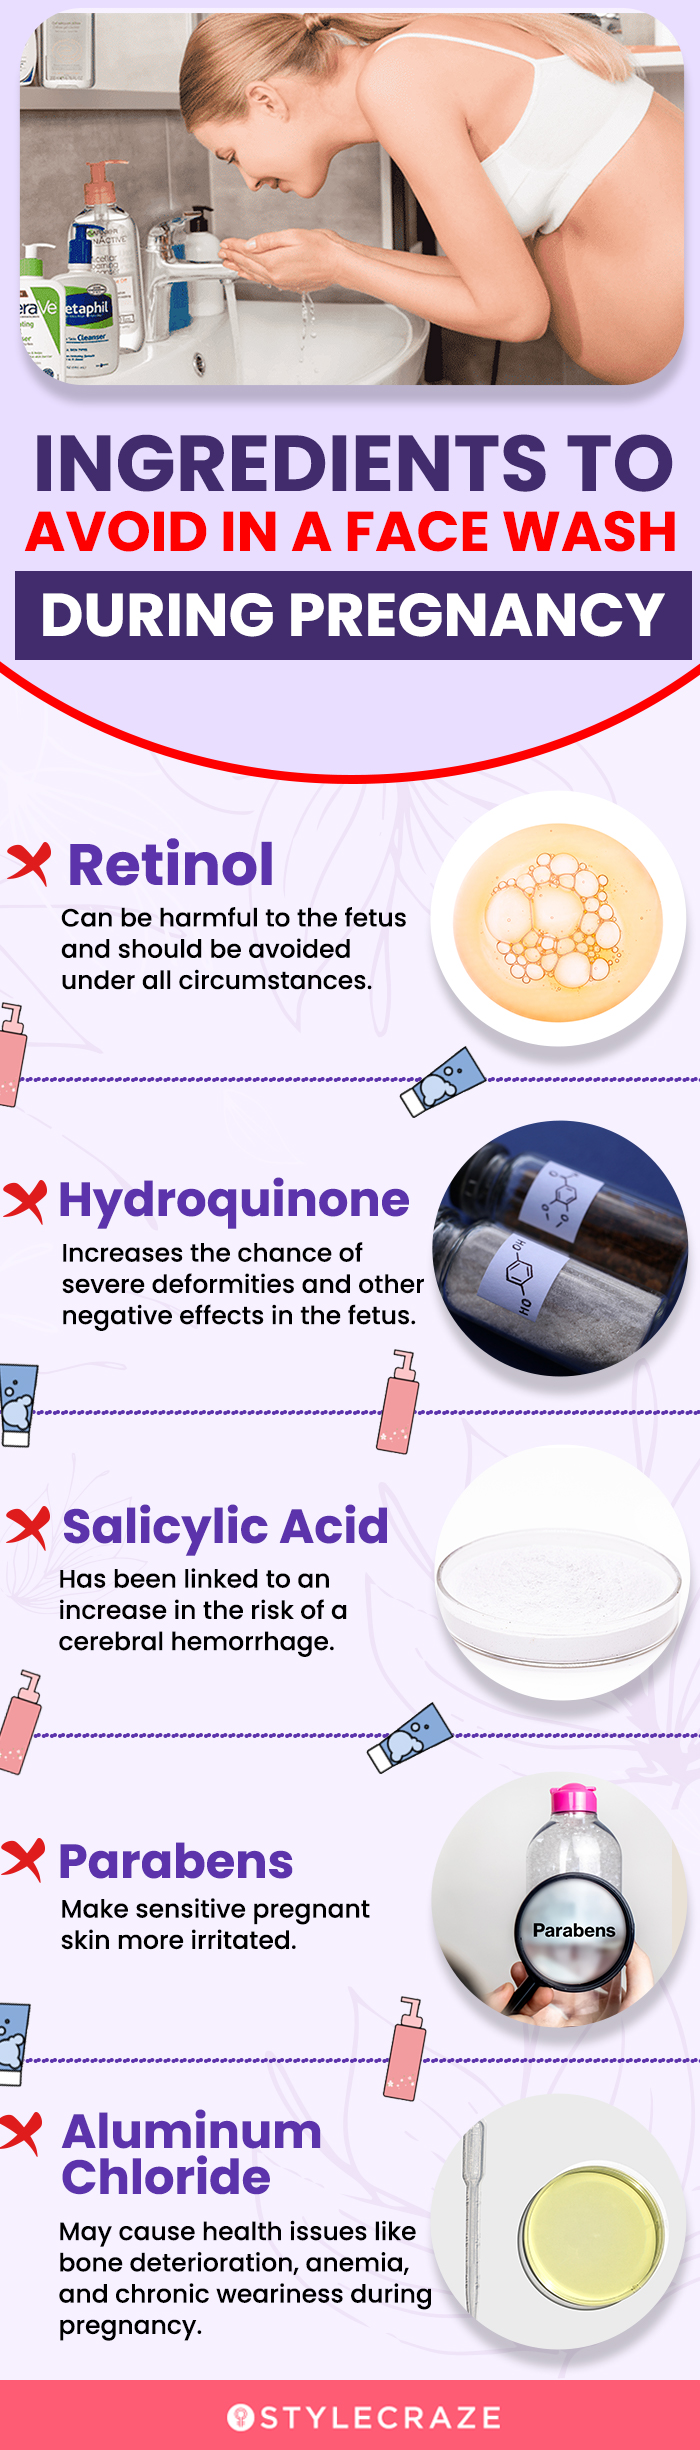 Ingredients To Avoid In A Face Wash During Pregnancy [infographic]